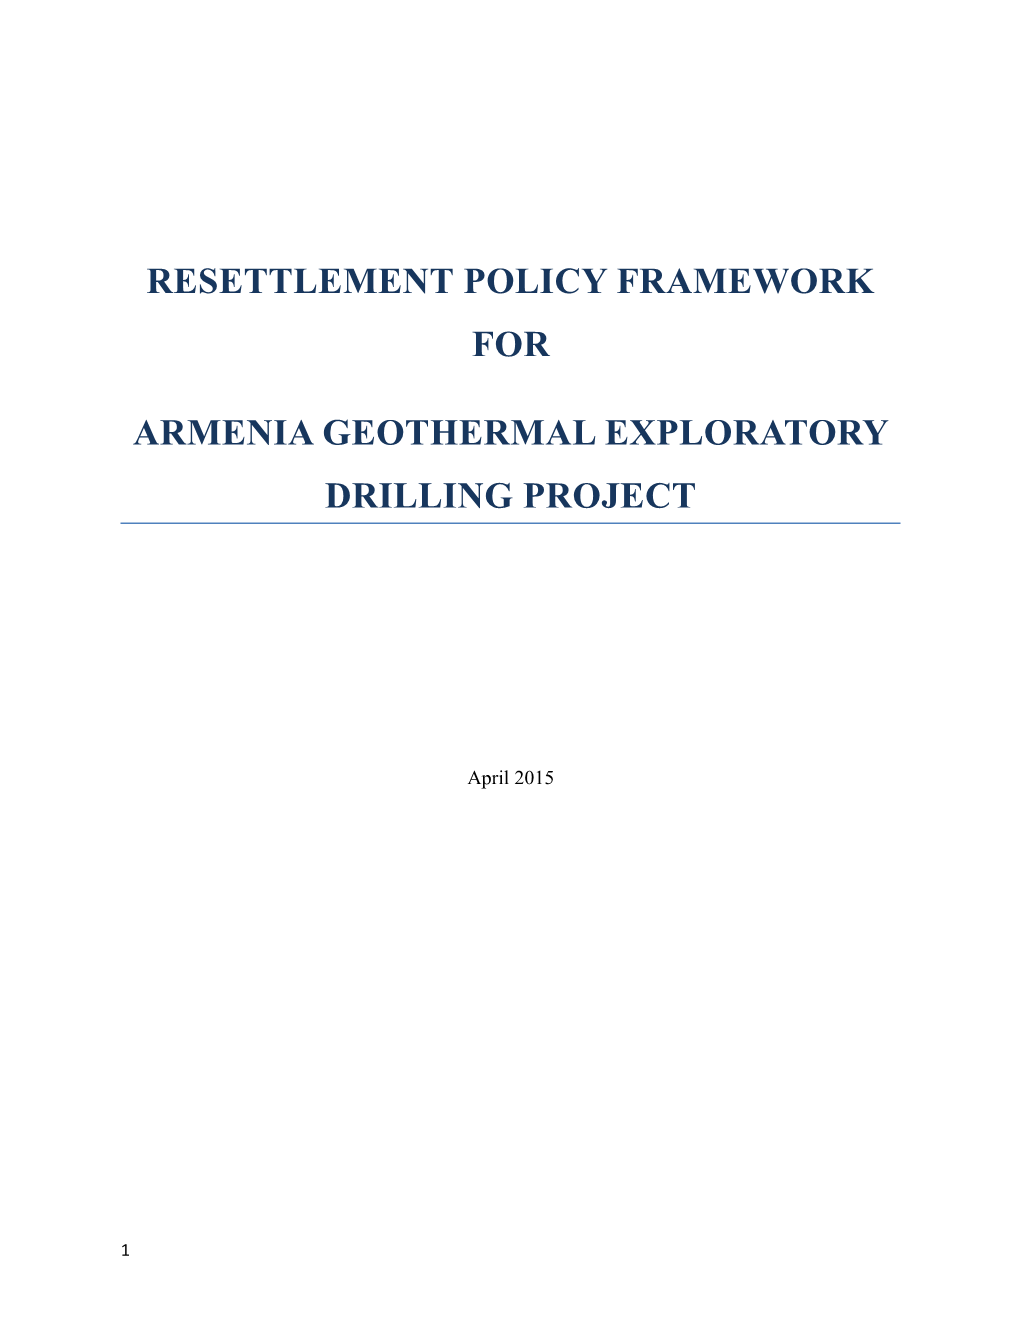 Armenia Geothermal Exploratory Drilling Project